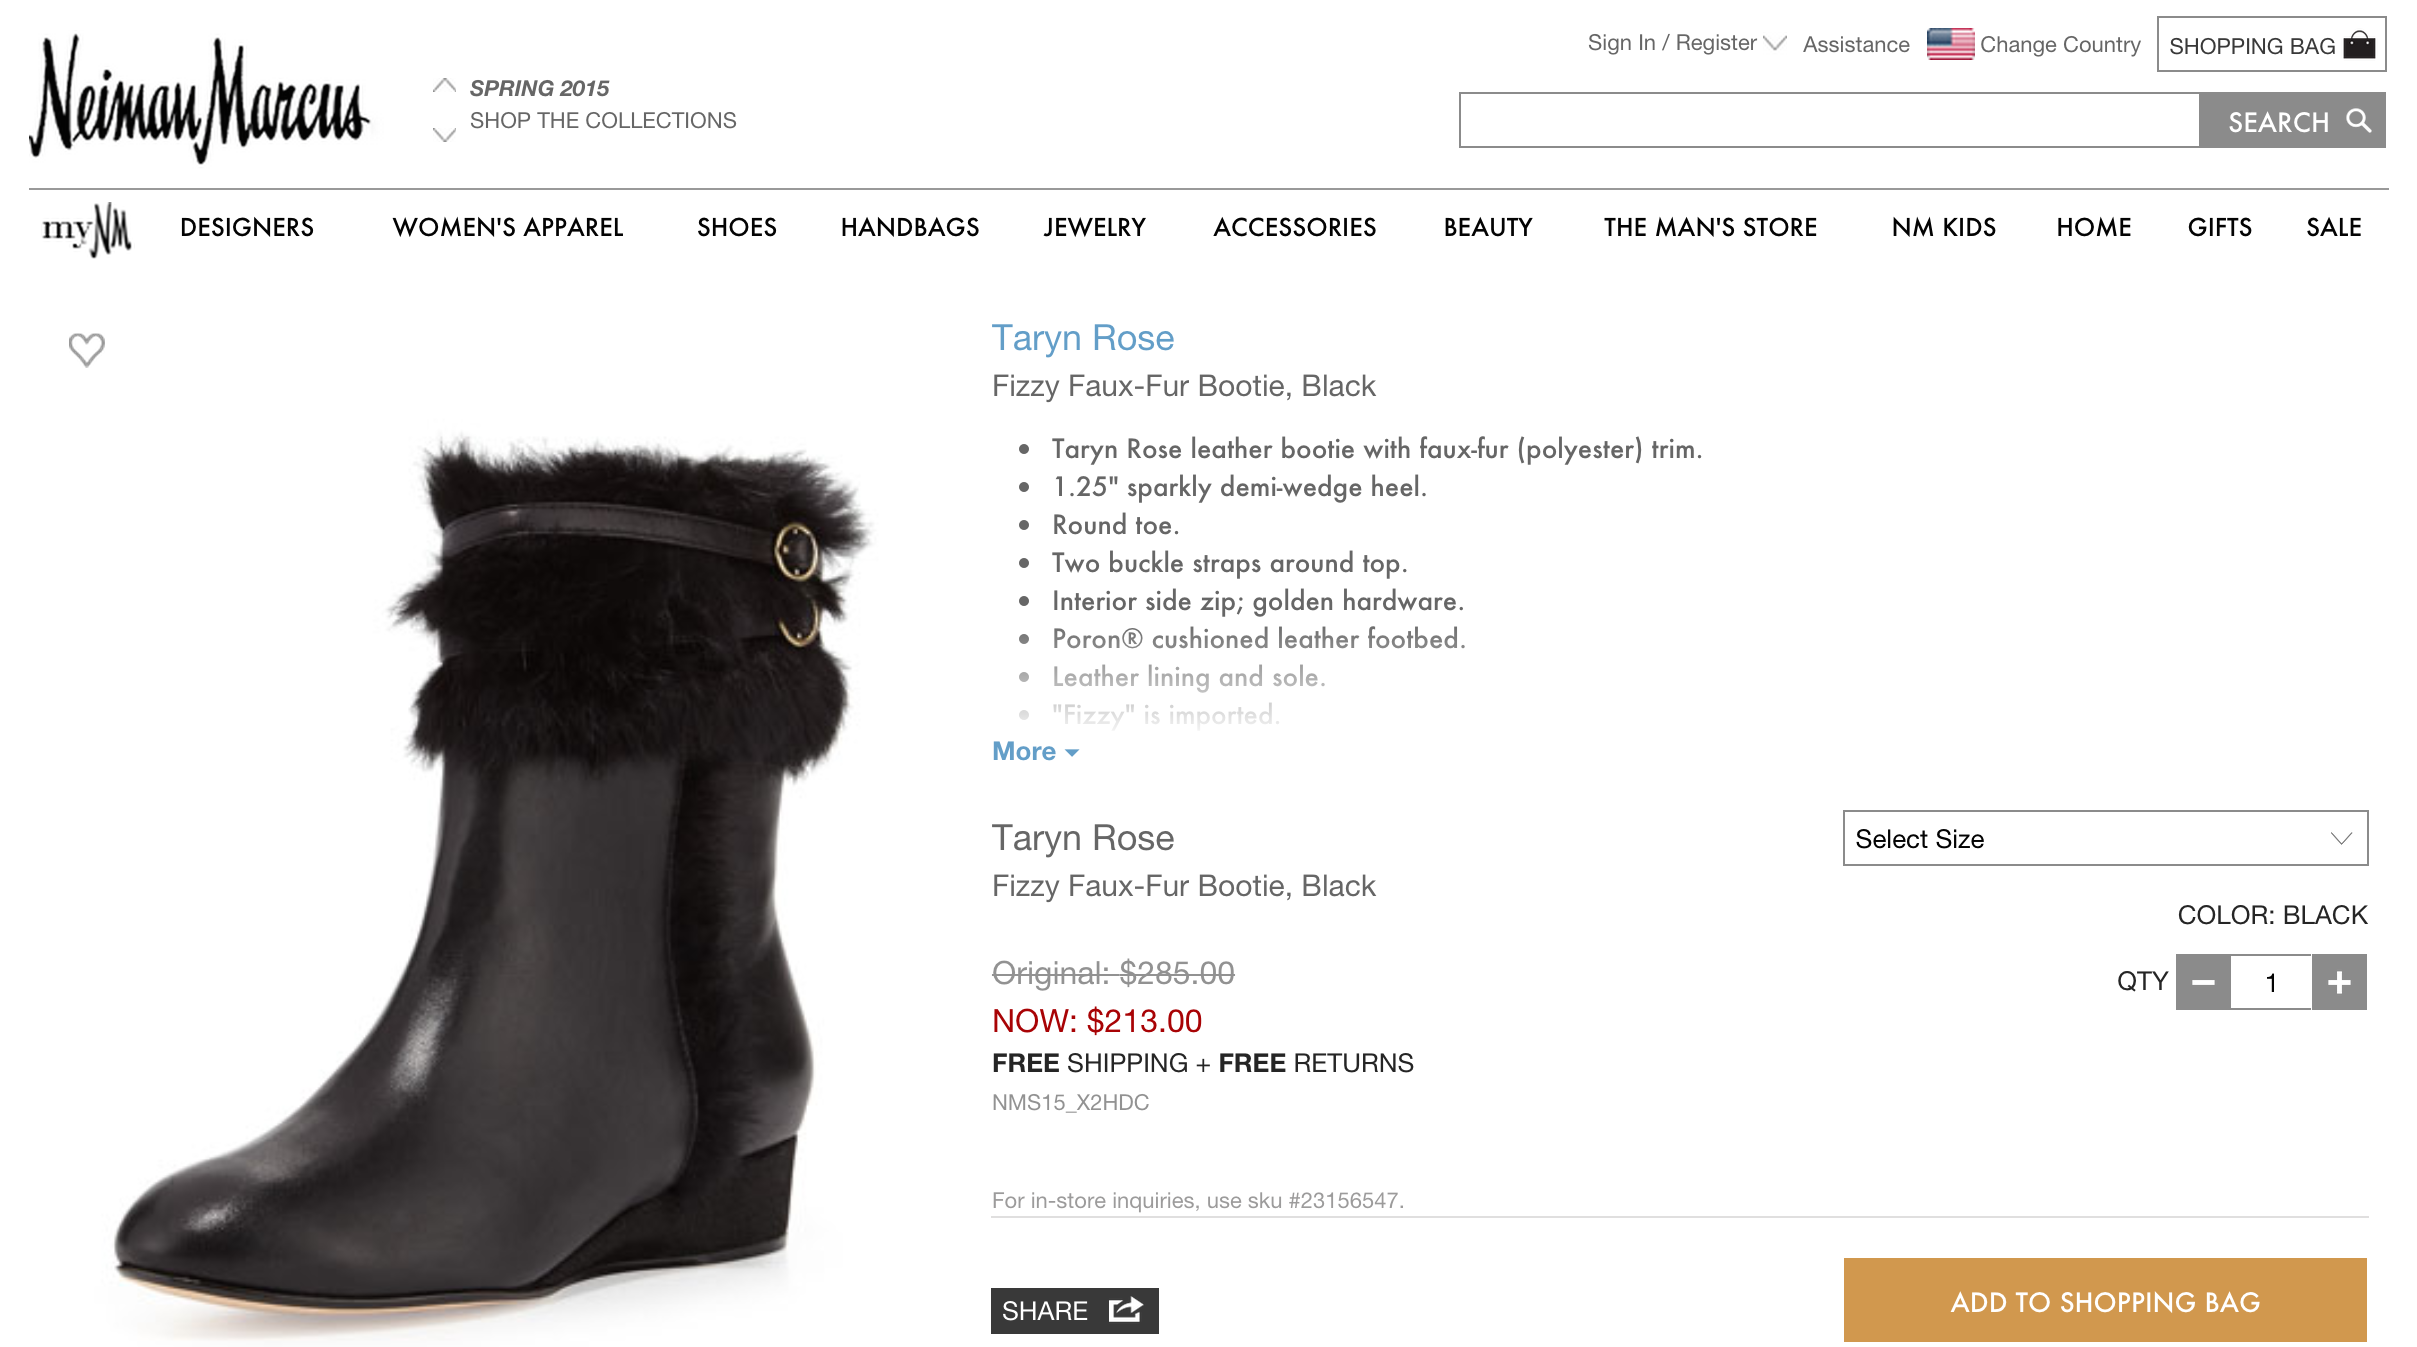 Neiman Marcus Accused Of Continuing To Sell “Faux Fur” Products Containing Real Fur